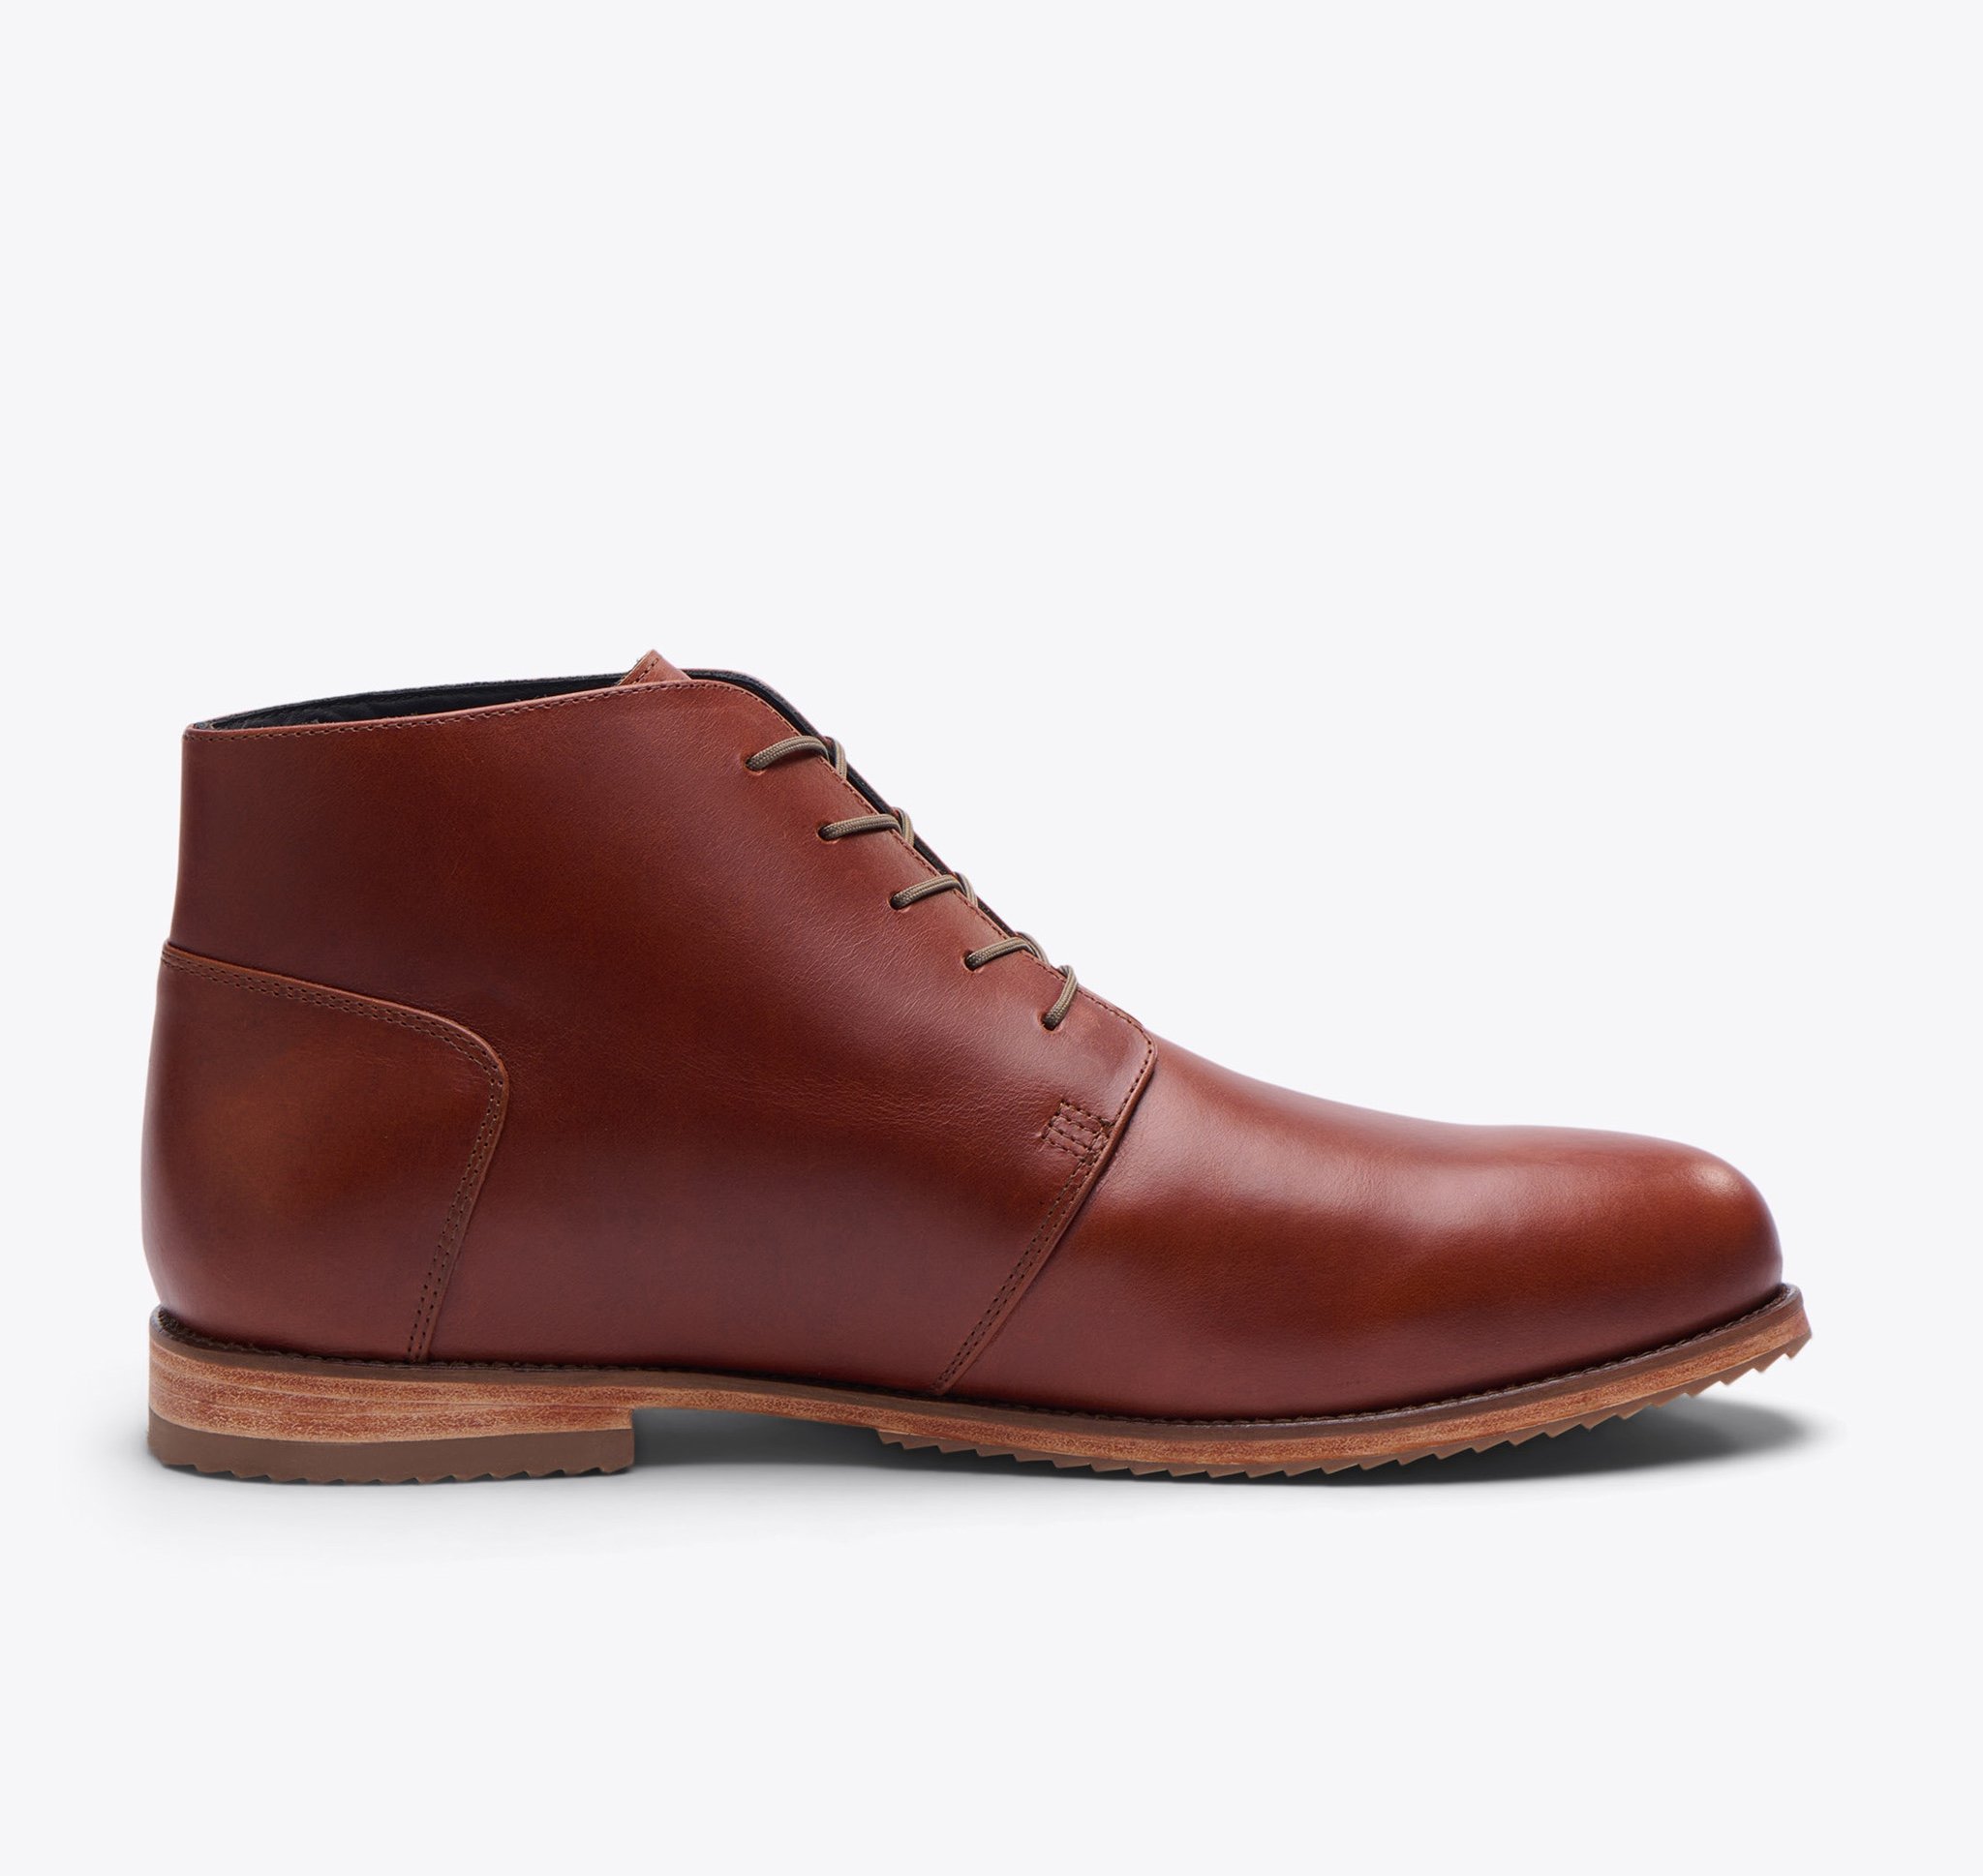 Nisolo Everyday Chukka Boot Brandy - Every Nisolo product is built on the foundation of comfort, function, and design. 